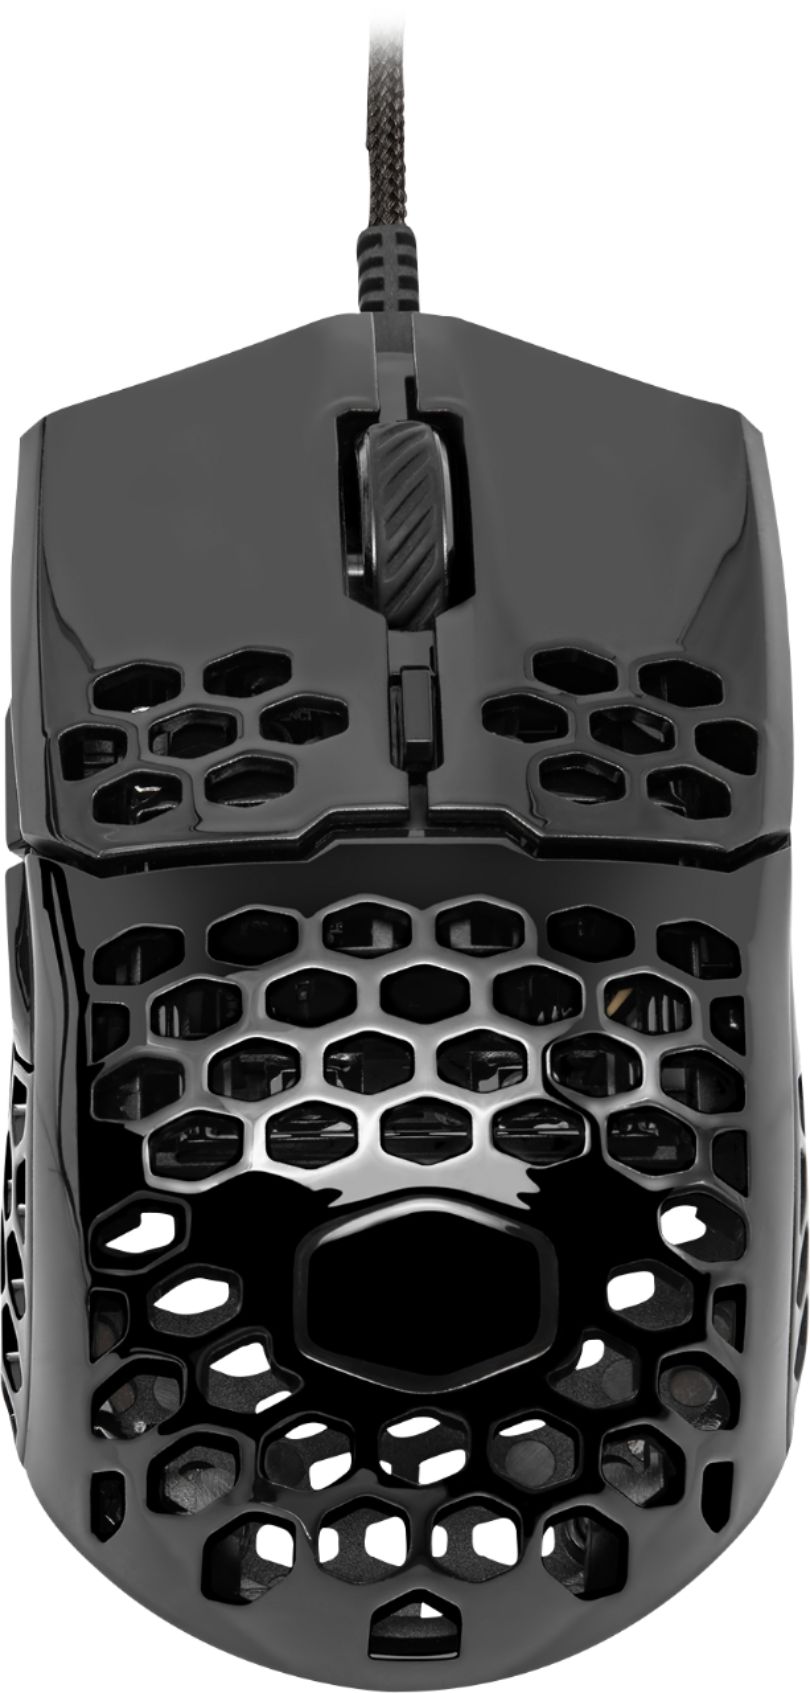 Cooler Master Gaming Mouse 